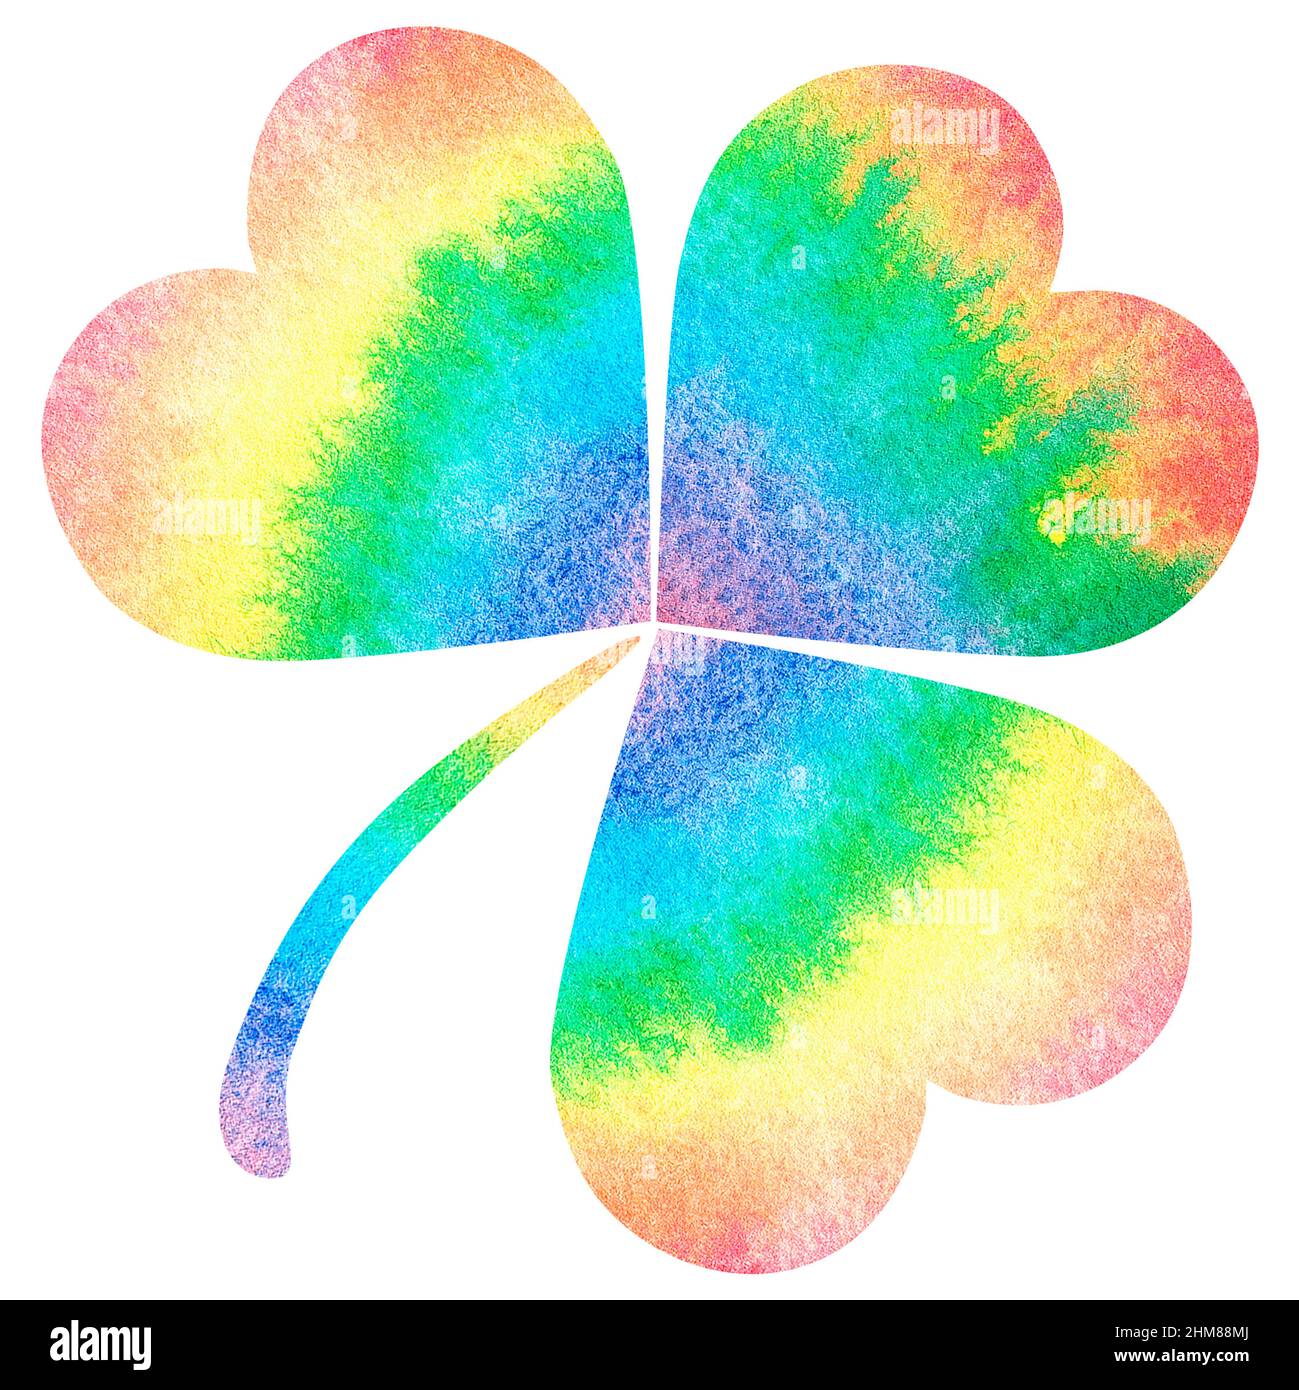 Rainbow shamrock clover. St. Patrick's Day. Watercolor illustration. Isolated on a white background. For your design. Stock Photo